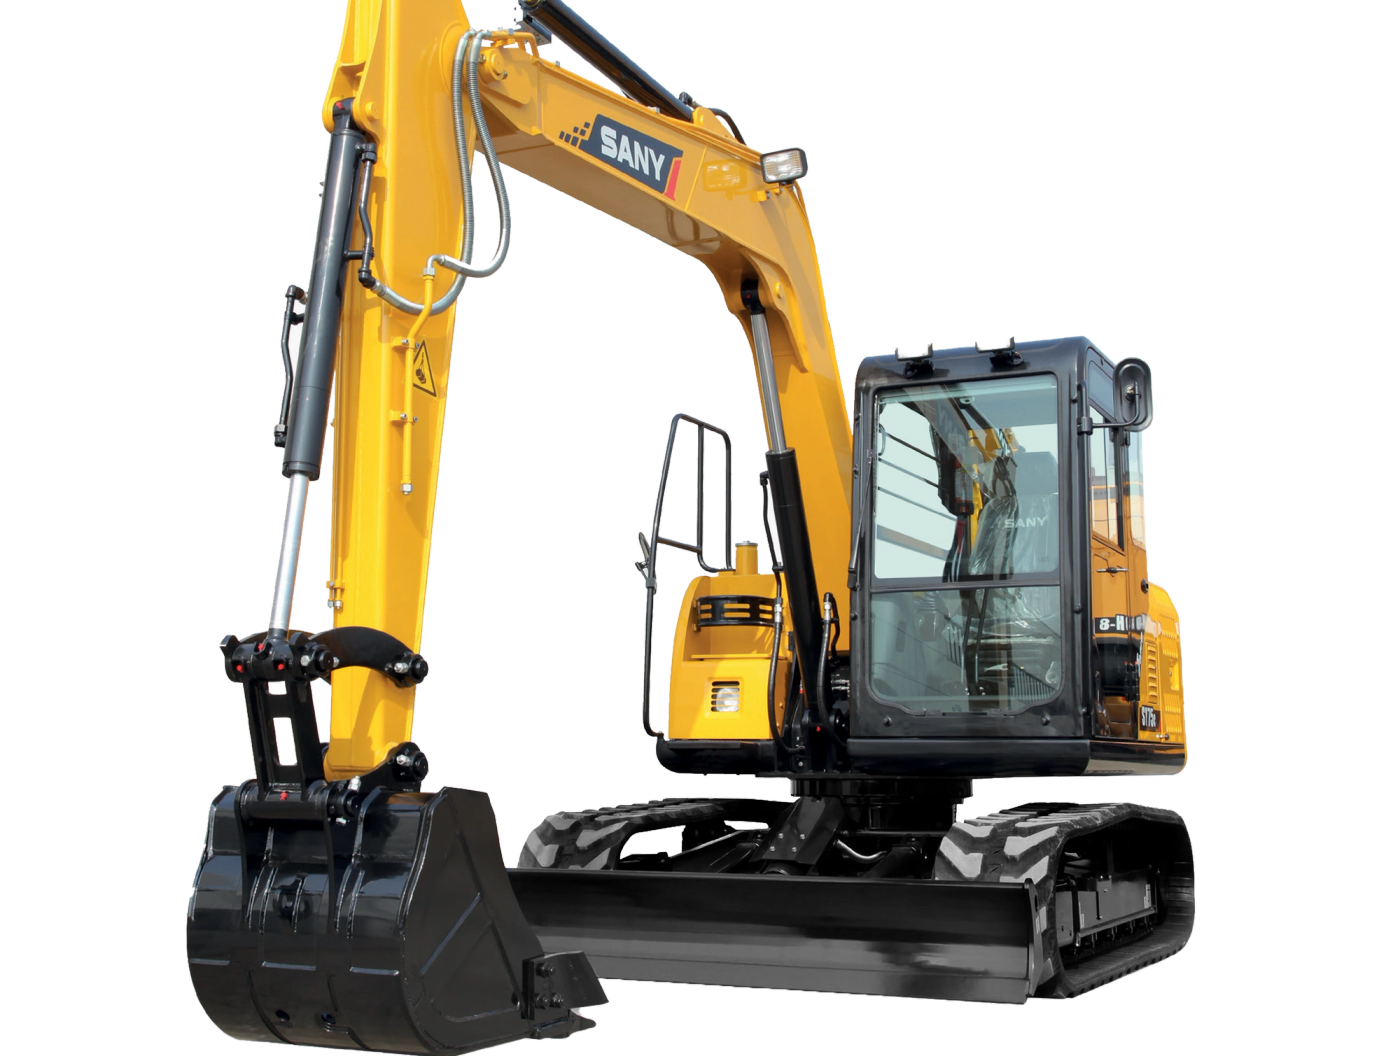 sany-sy75c-excavator-for-sale-or-rent